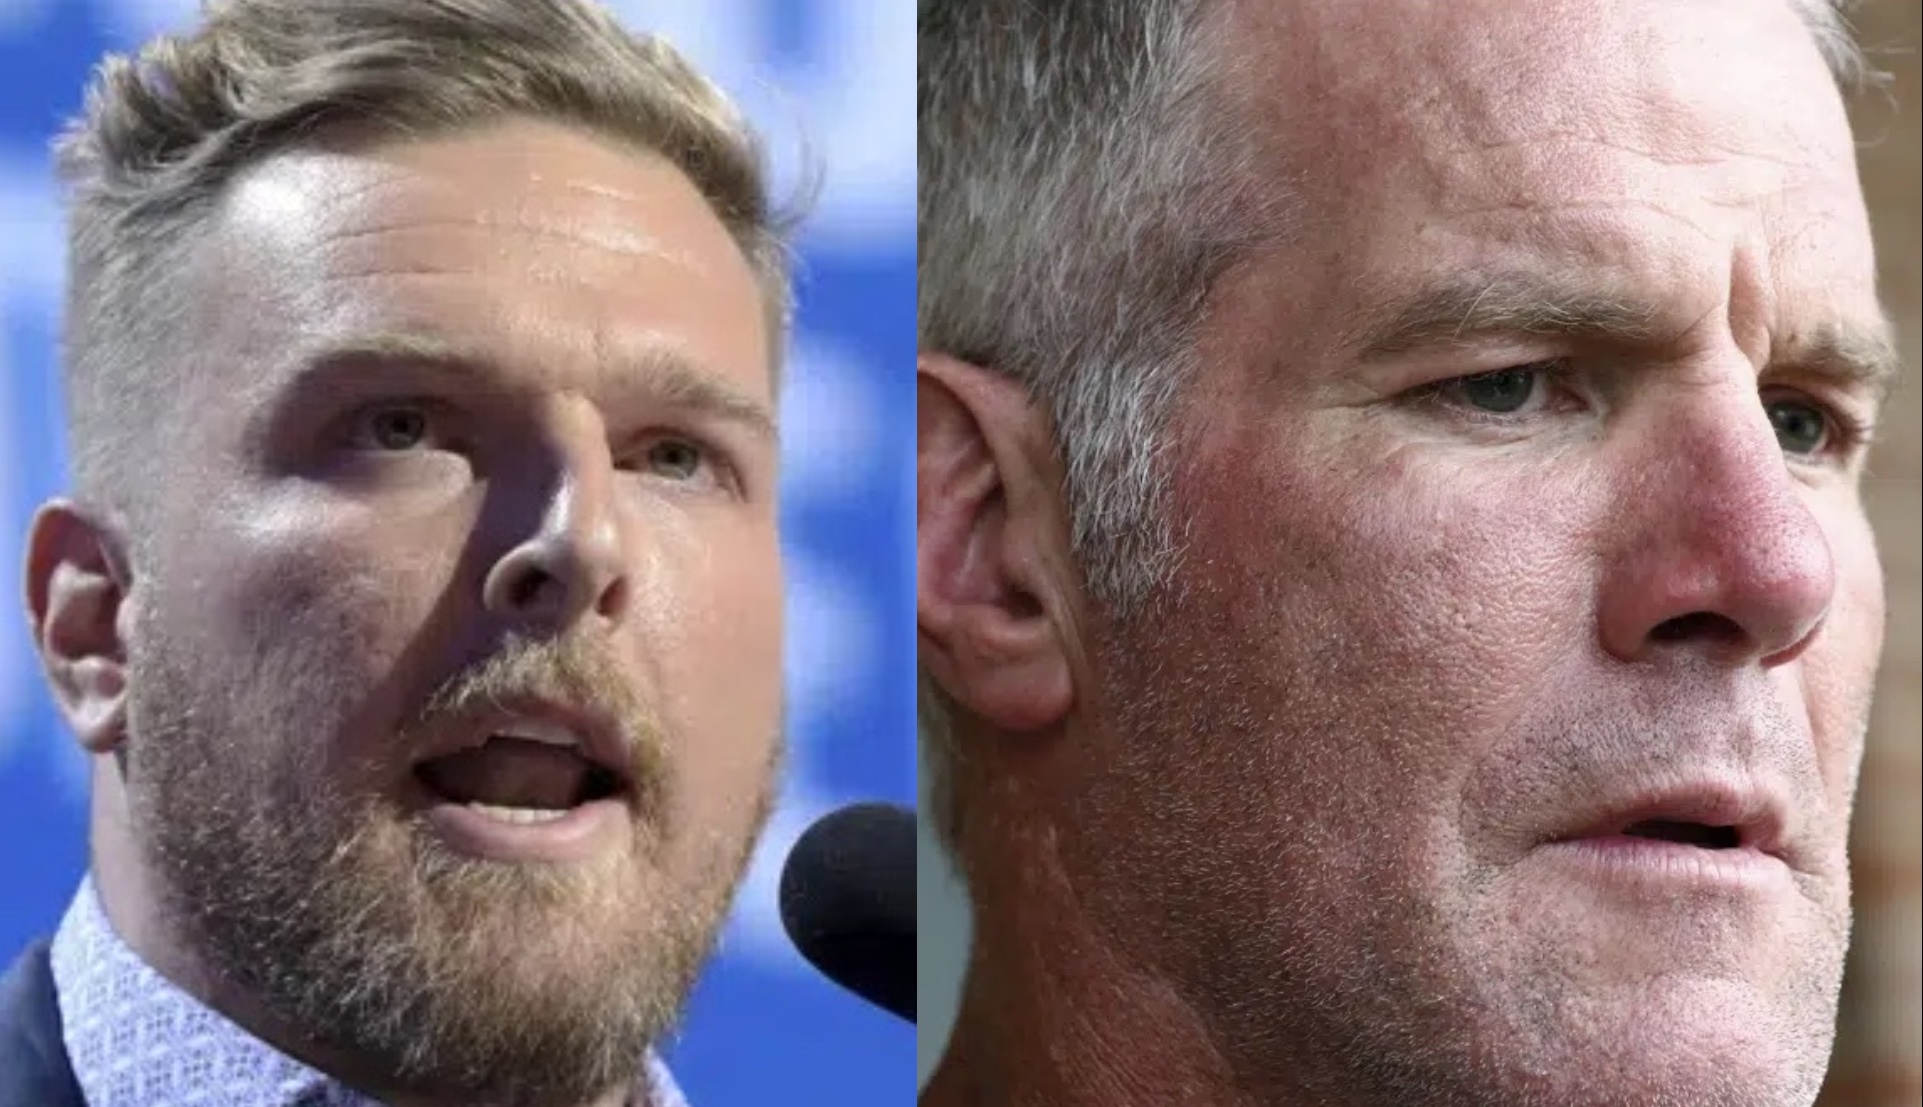 Favre ends lawsuit after sportscaster McAfee apologizes over ‘stealing from poor’ remark